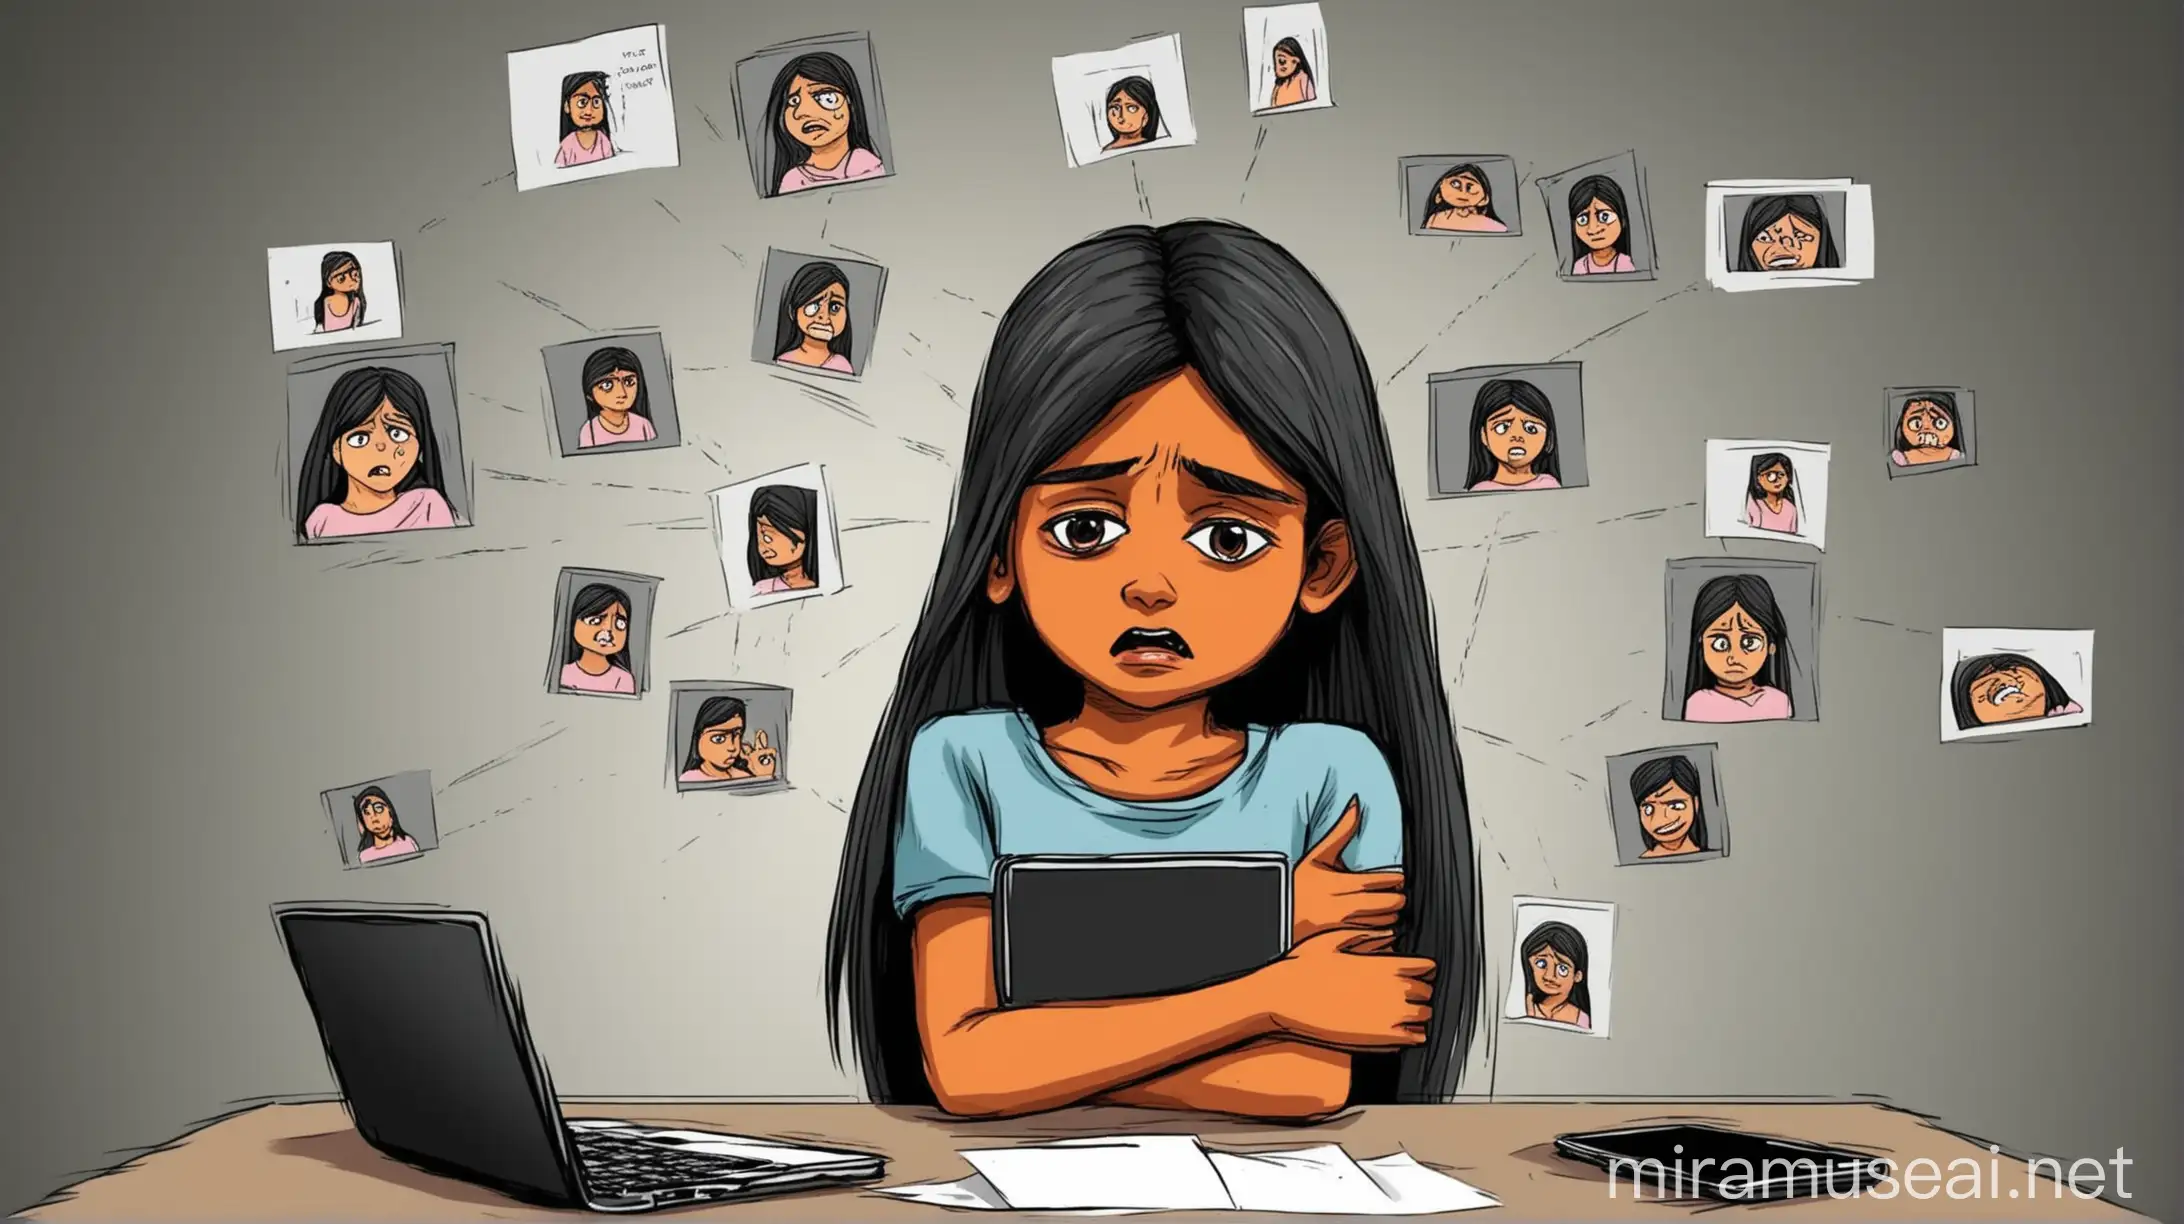 Illustration of Cyber Bullying 12YearOld Indian Girl Child Facing Online Harassment